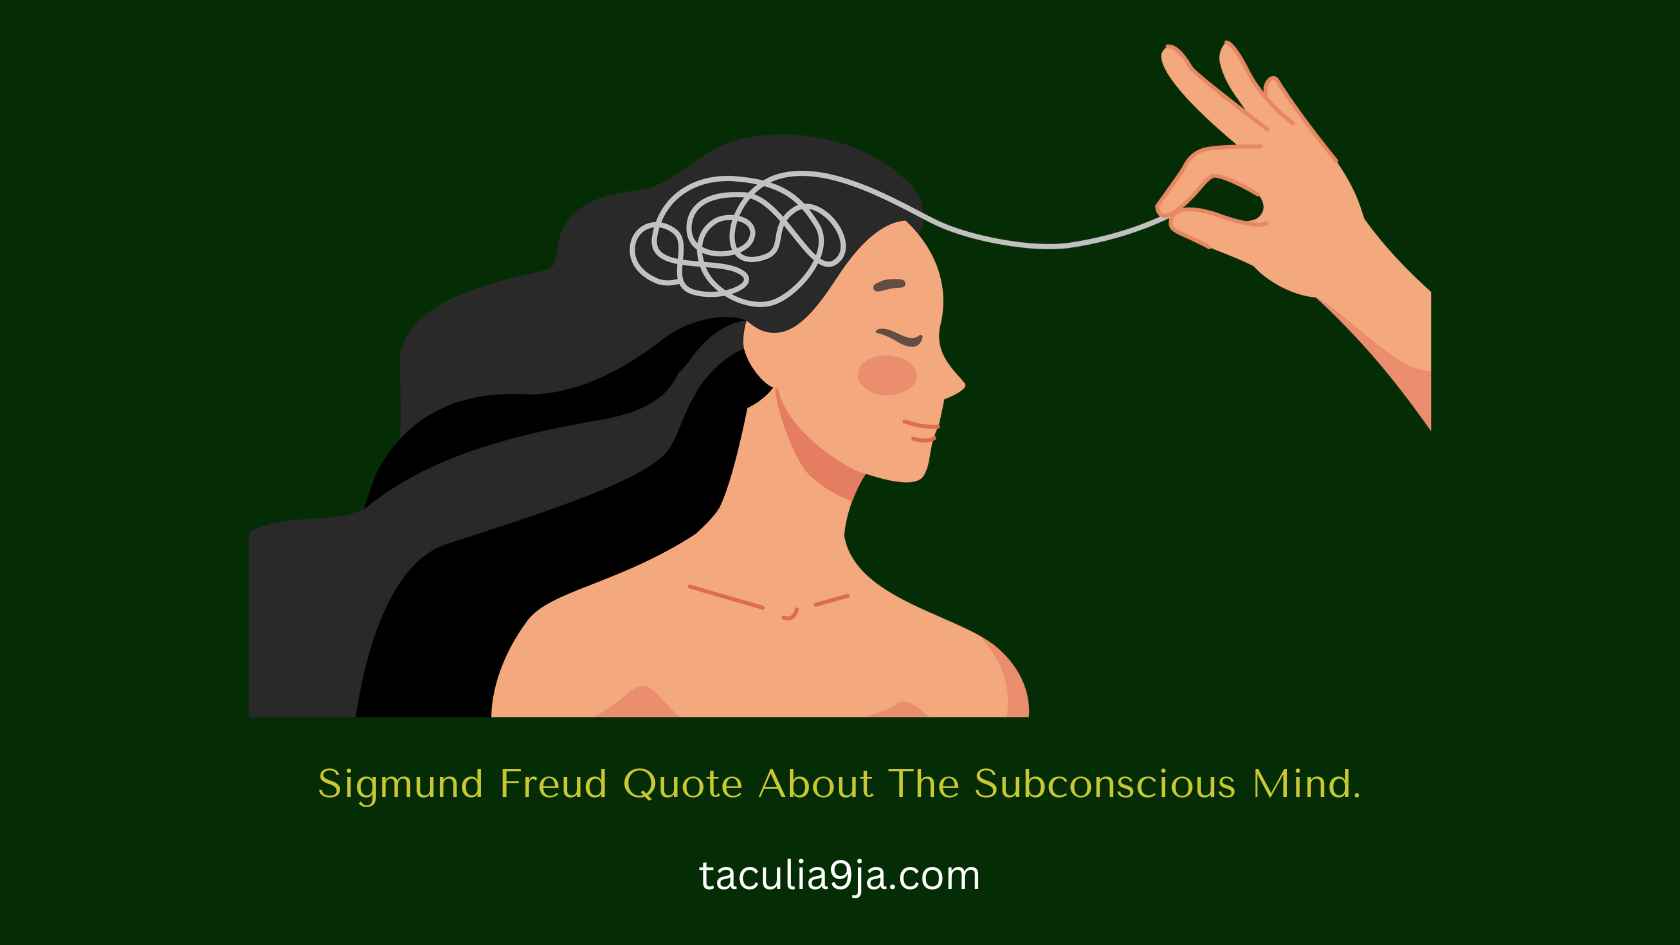 Sigmund Freud Quote About The Subconscious Mind.